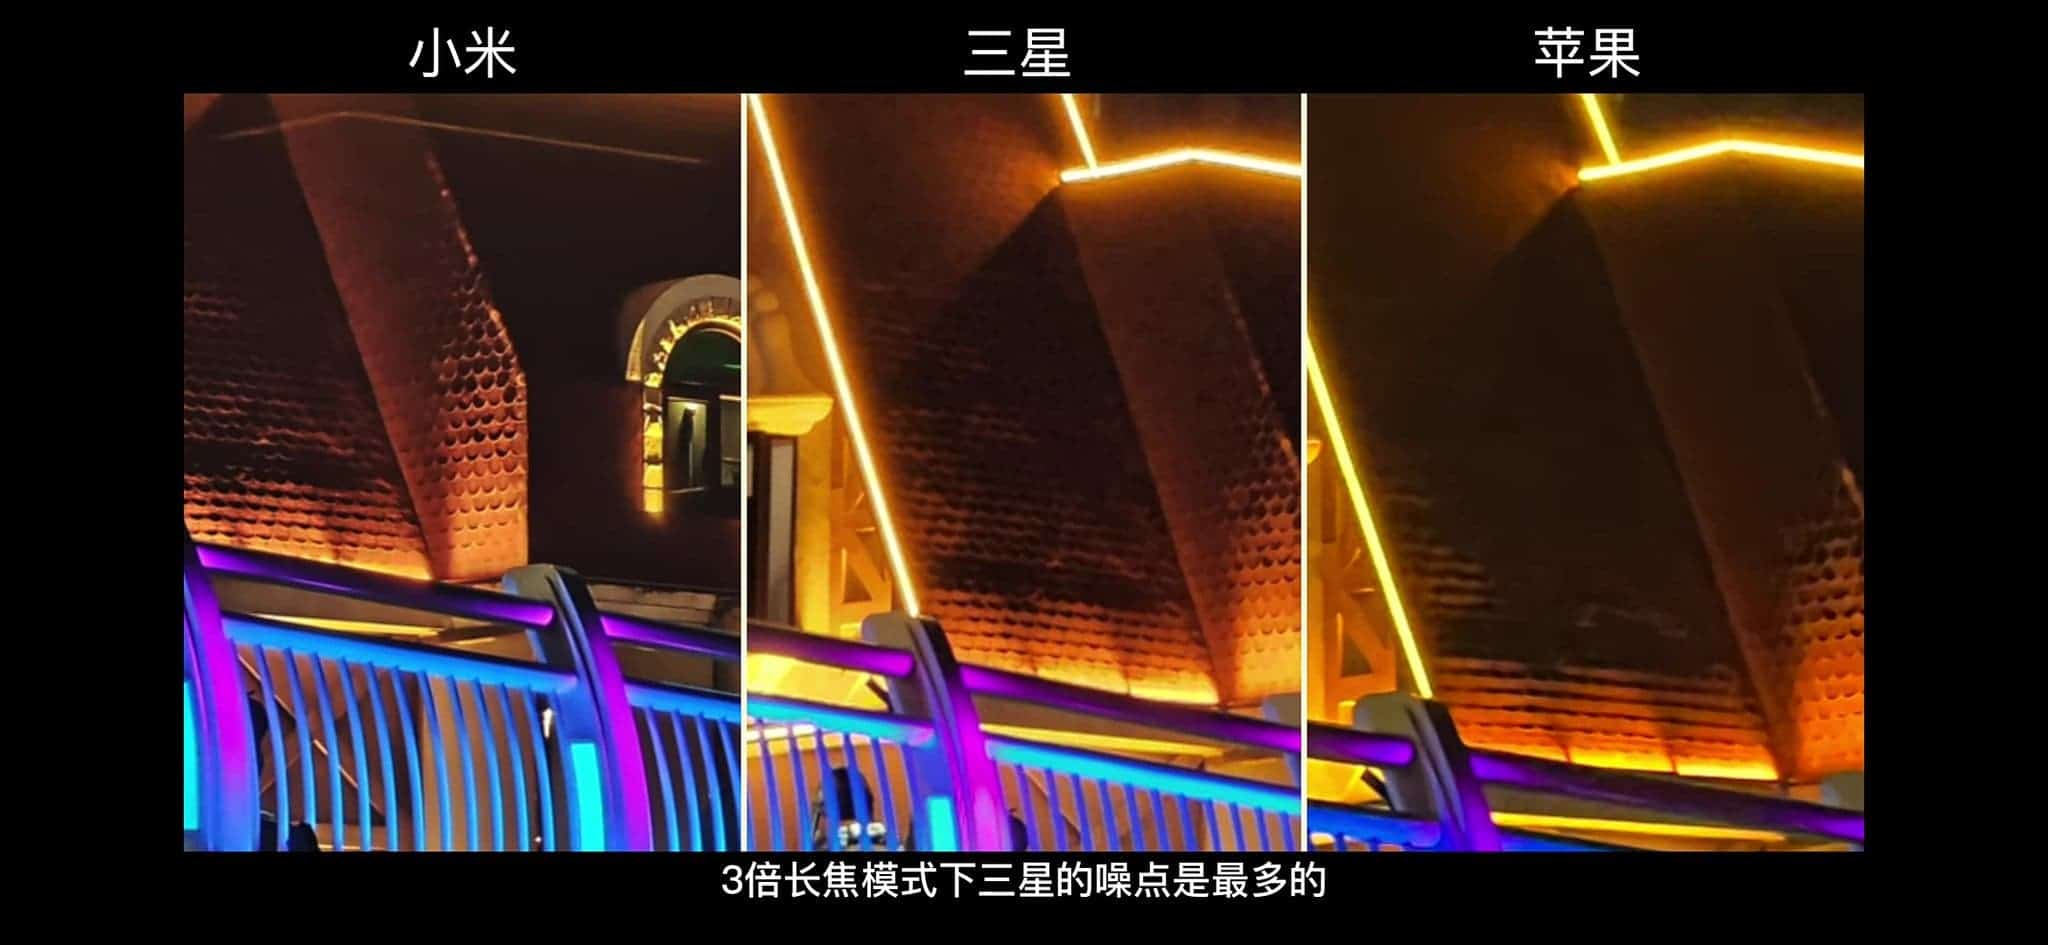 Xiaomi 12S Ultra camera compared with iPhone and Samsung flagships